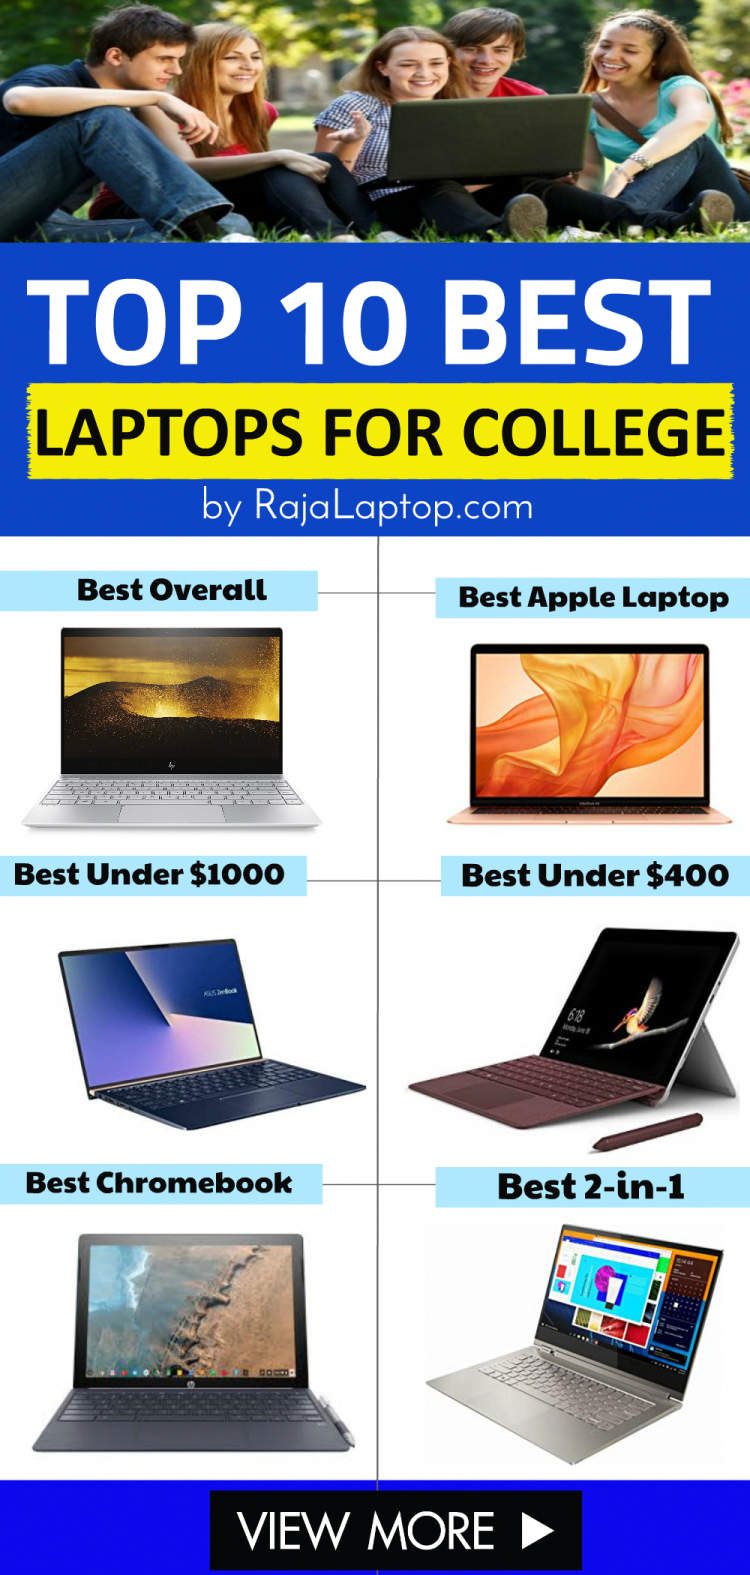 Tips to Find a Free Laptop and Online College Education